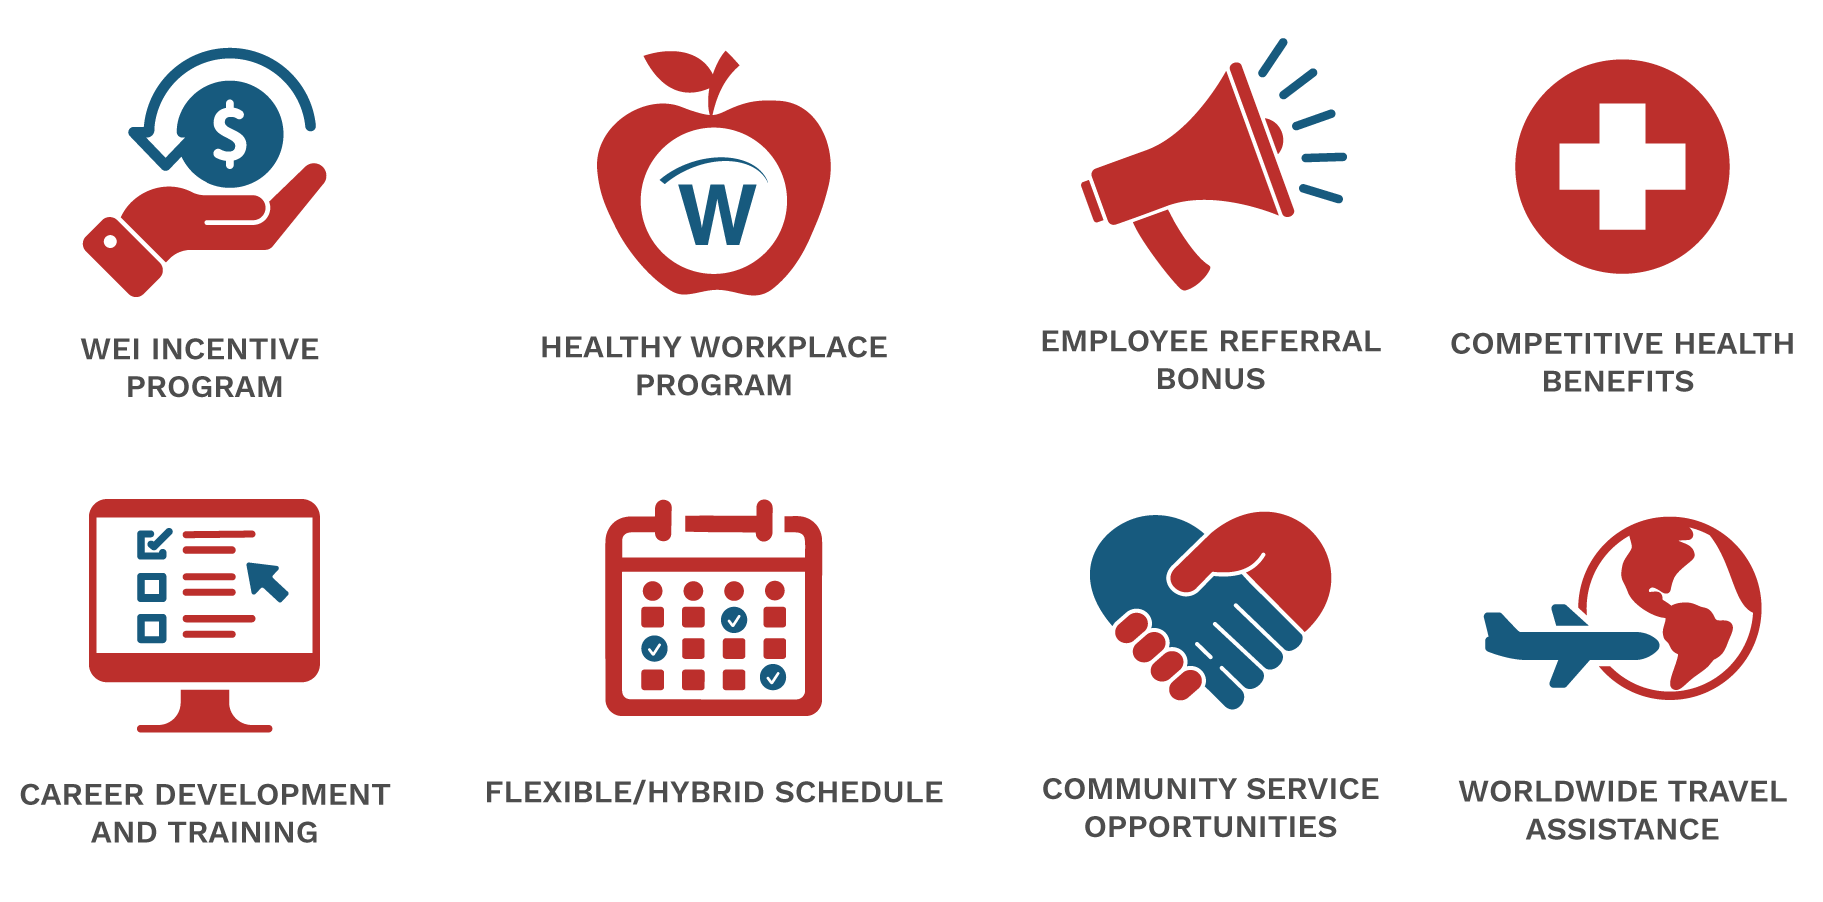 WEI Incentive Program Healthy Workplace Program Competitive Health Benefit Employee Referral Bonus Career Development and Training Flexible or Hybrid Schedule Community Service Opportunities Worldwide Travel Assistance